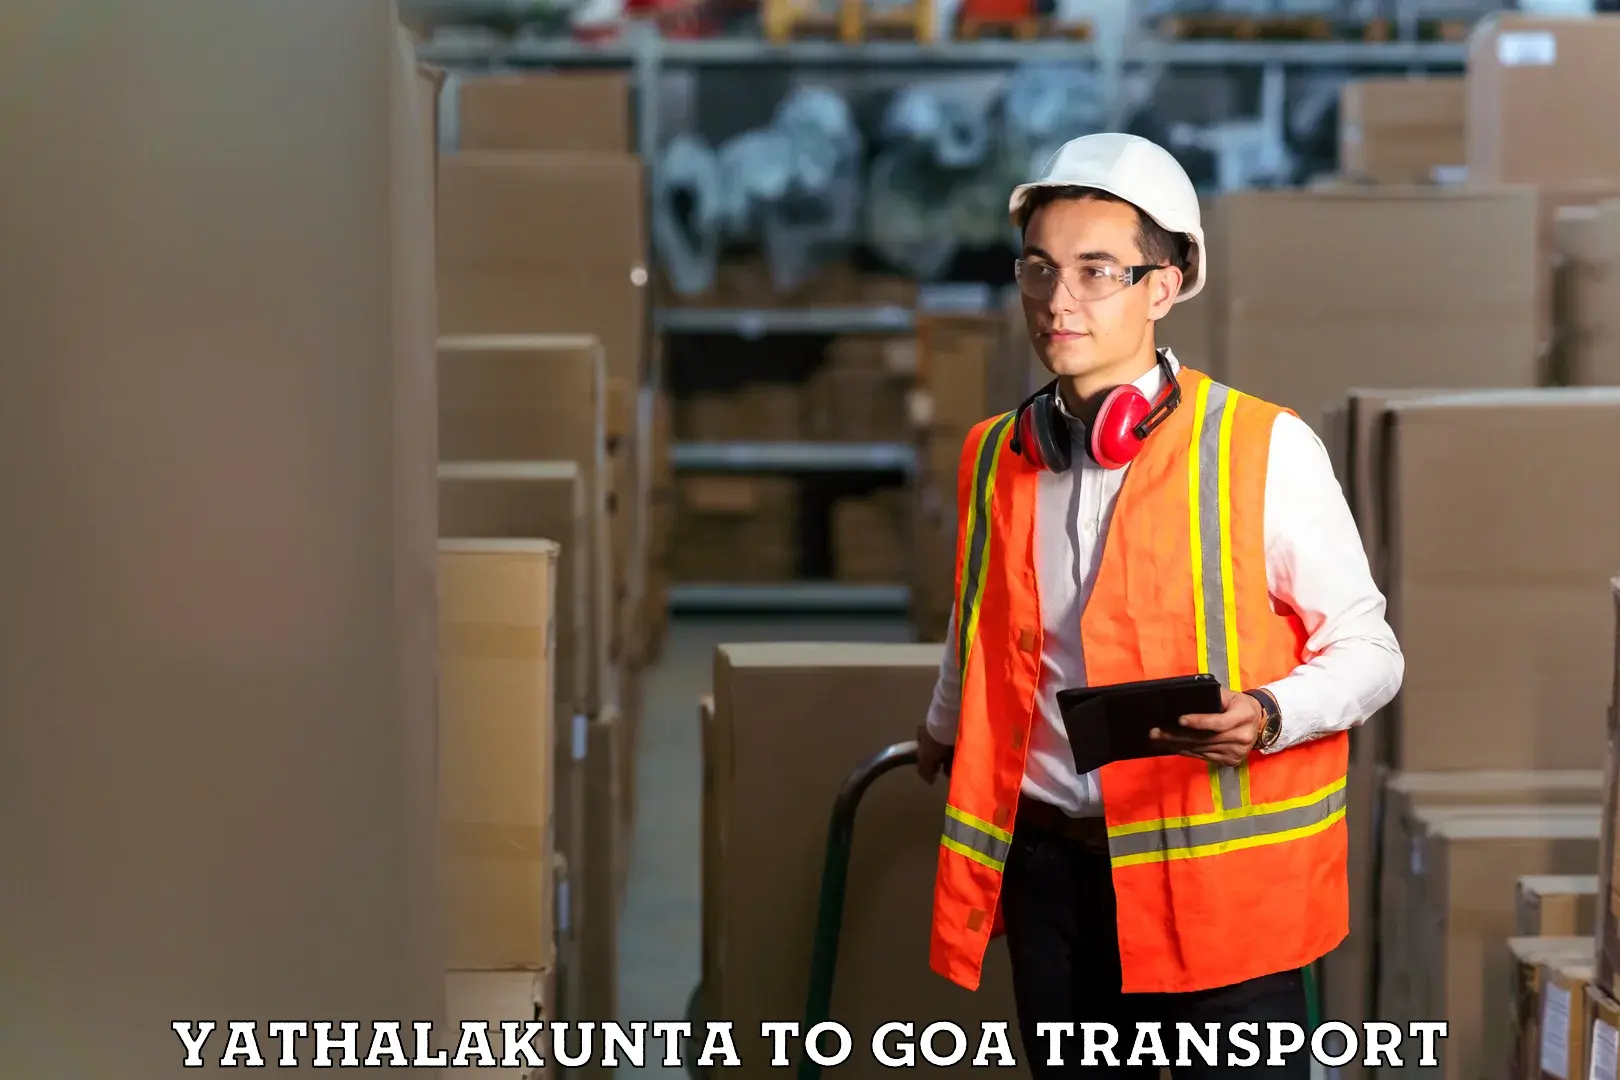 Transport shared services Yathalakunta to Goa